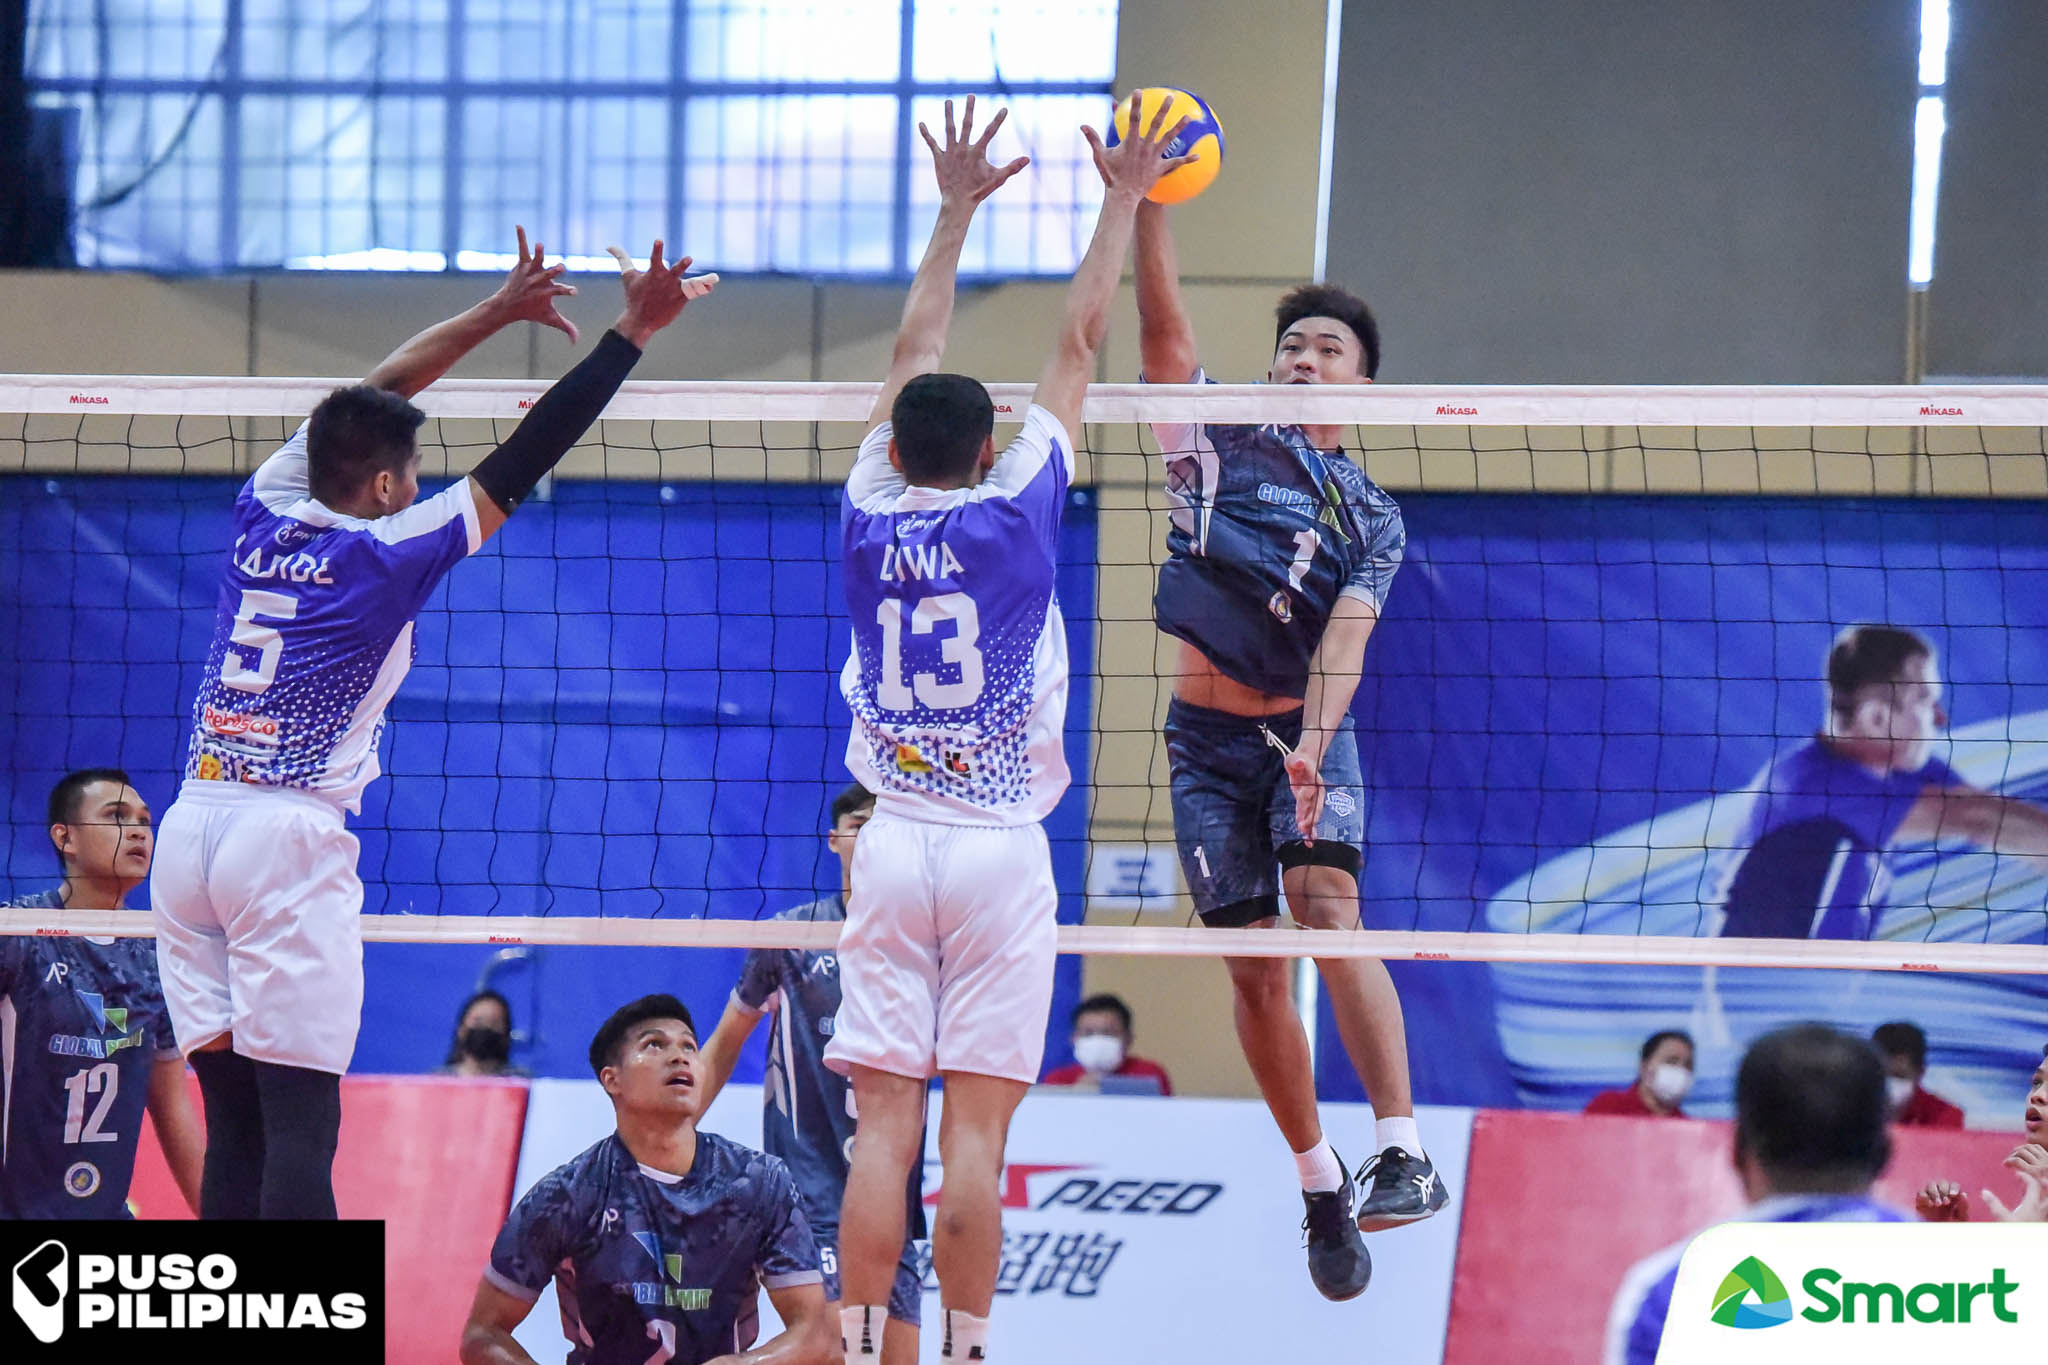 PNVF-Global-Remit-vs.-VNS-Disquitado-5672 Jade Disquitado grateful for Spikers Turf exposure that led him to NT pool News Spikers' Turf Volleyball  - philippine sports news